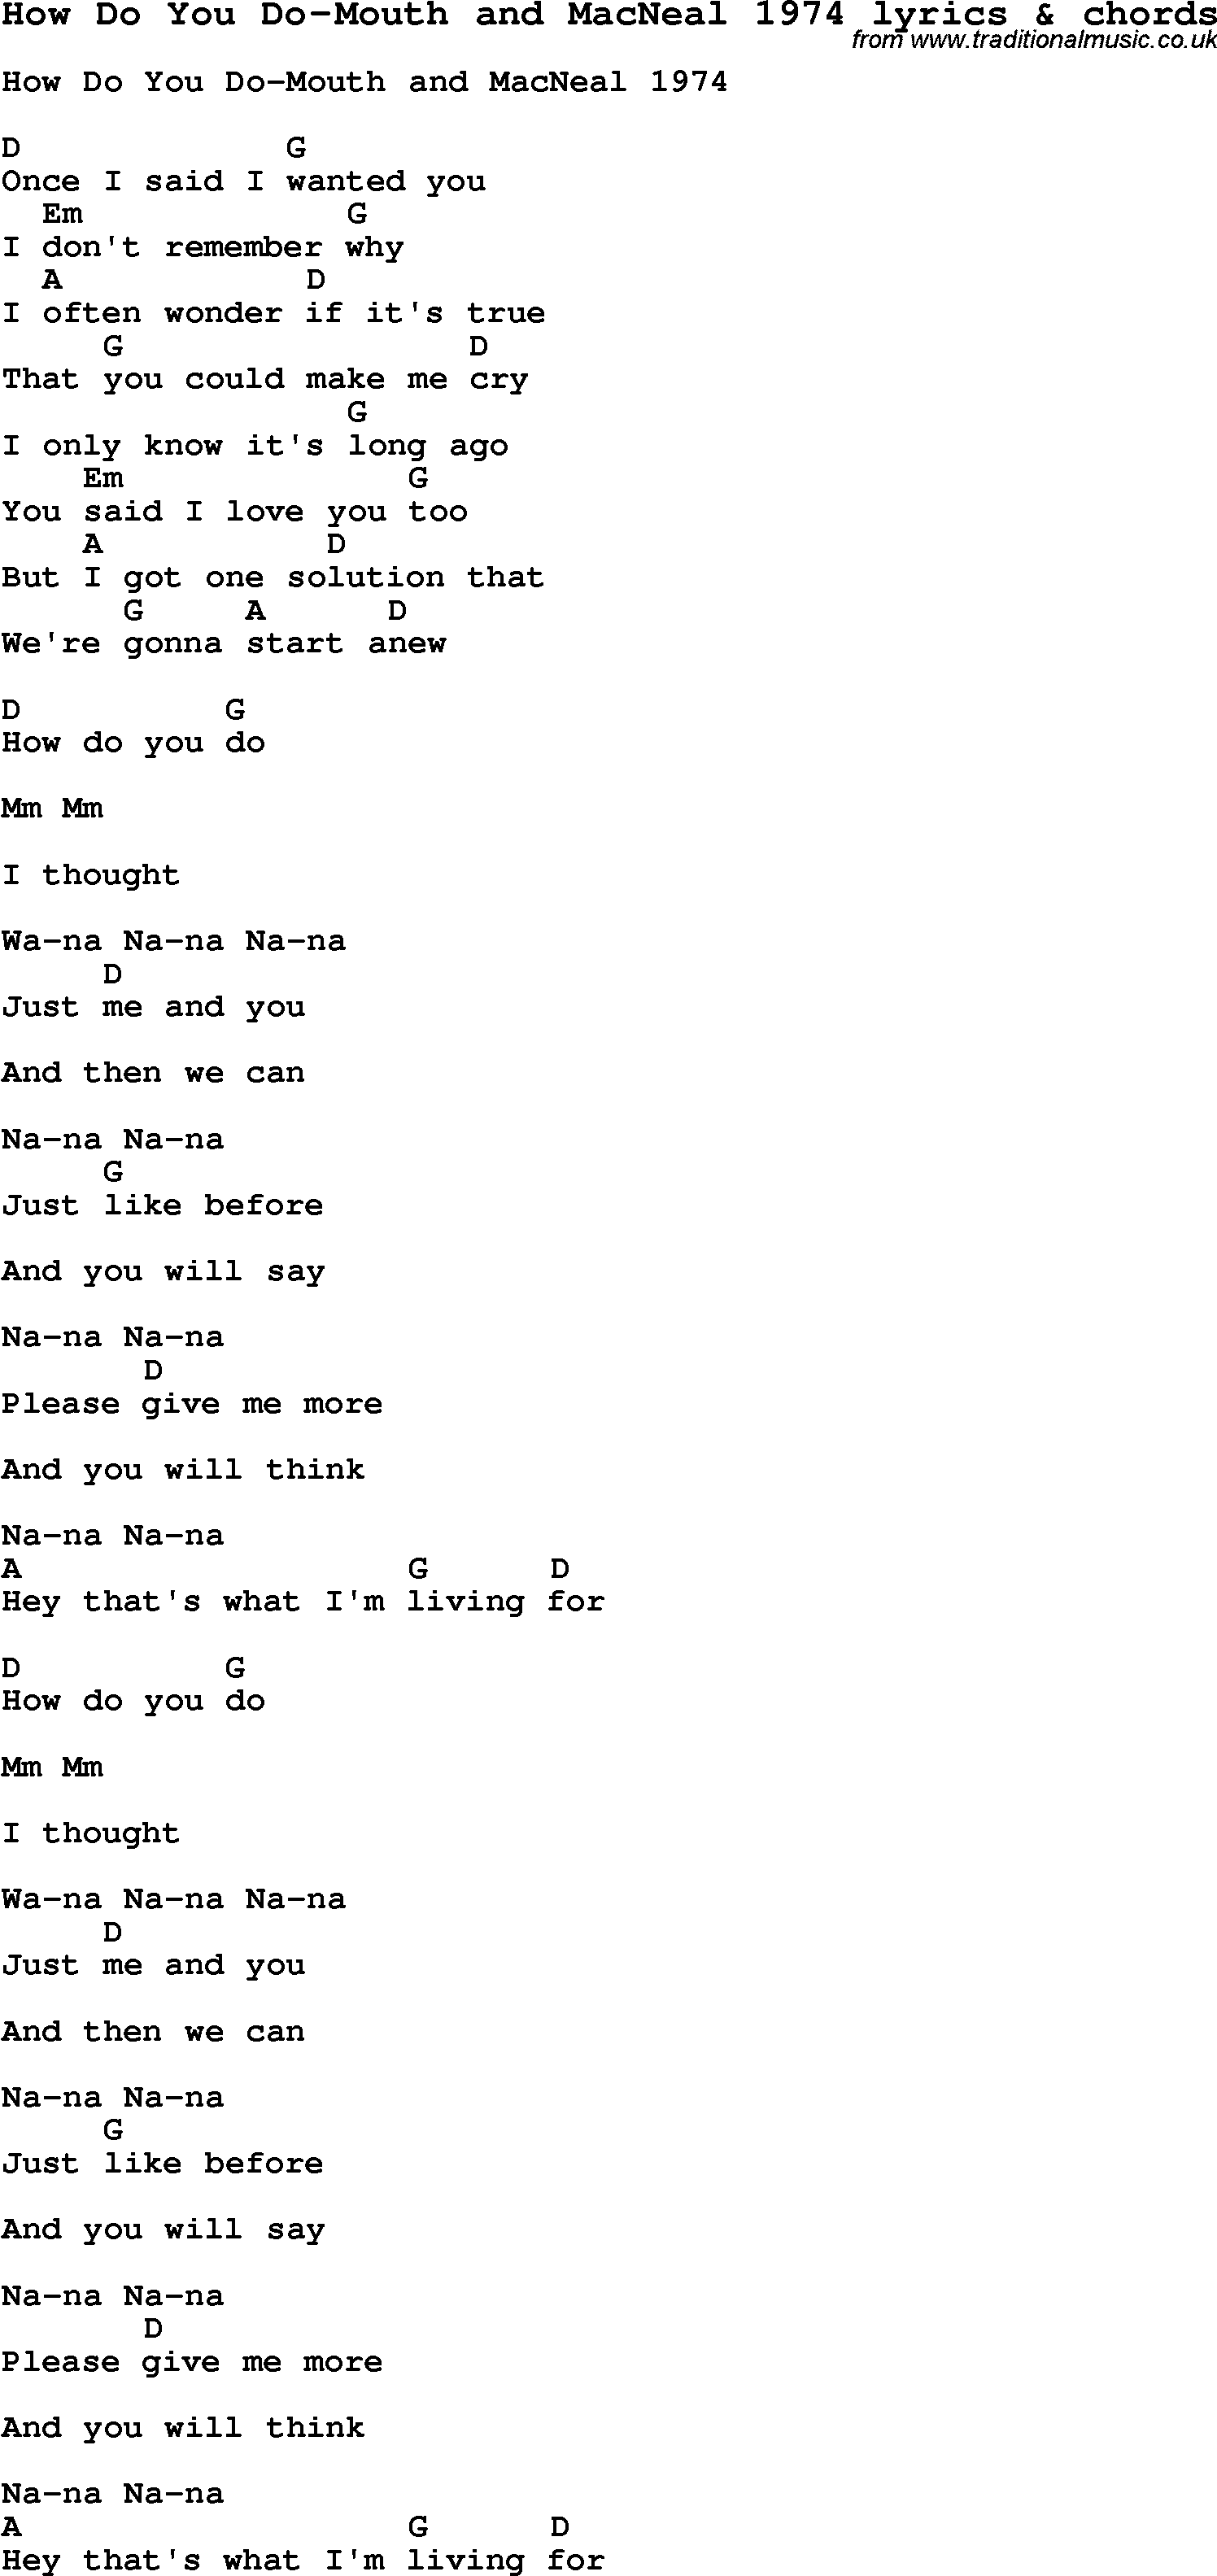 Love Song Lyrics for: How Do You Do-Mouth and MacNeal 1974 with chords for Ukulele, Guitar Banjo etc.